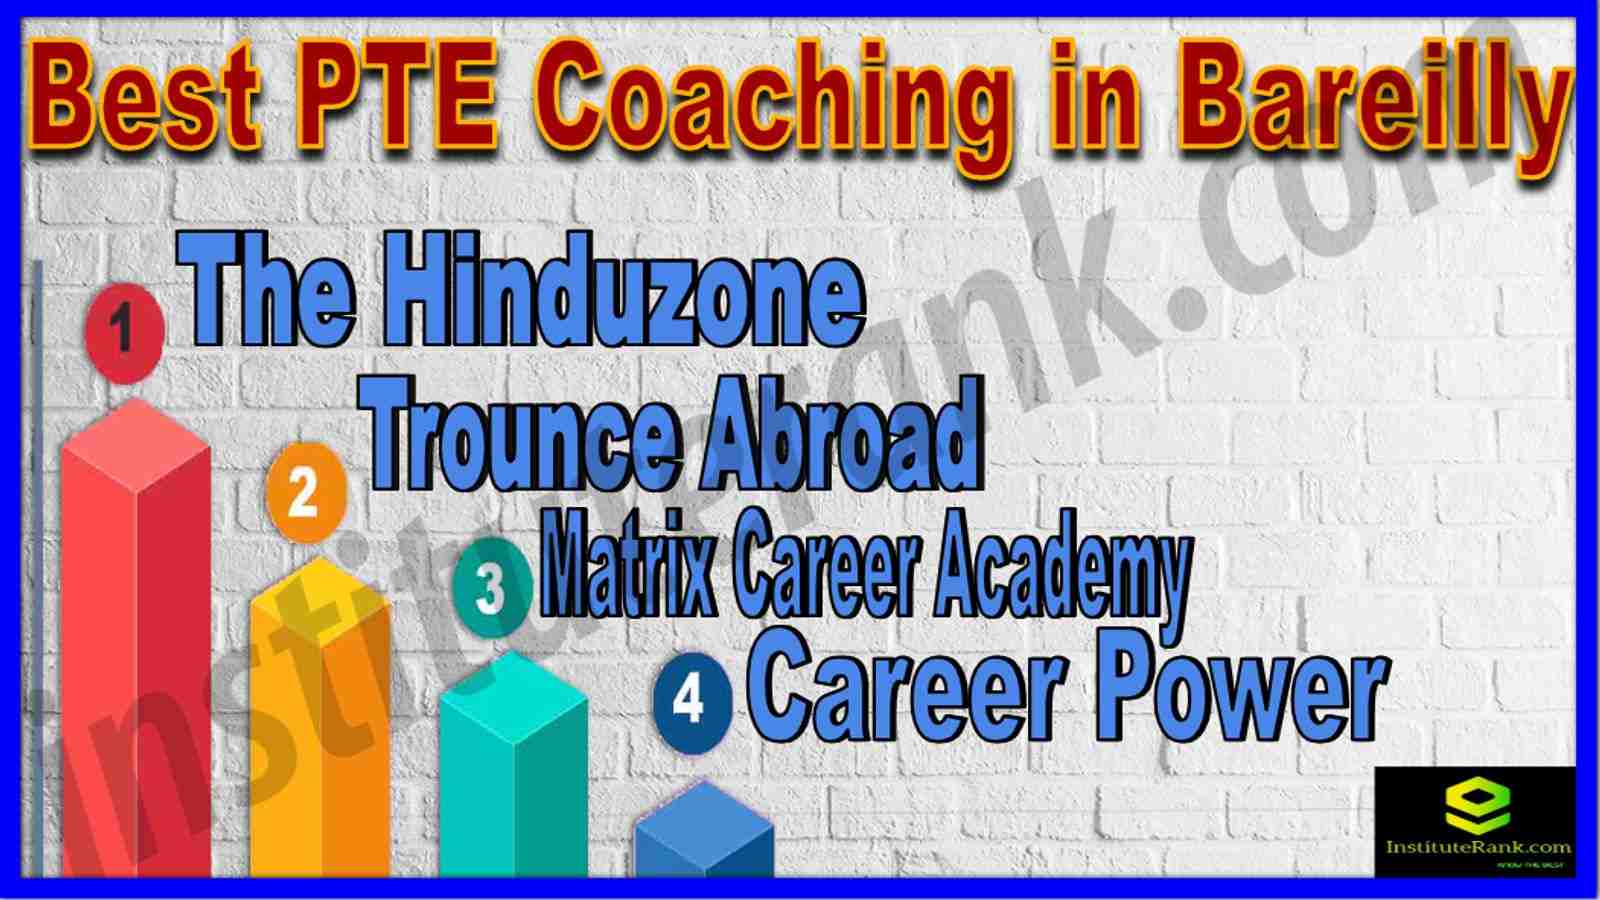 Best PTE Coaching in Bareilly